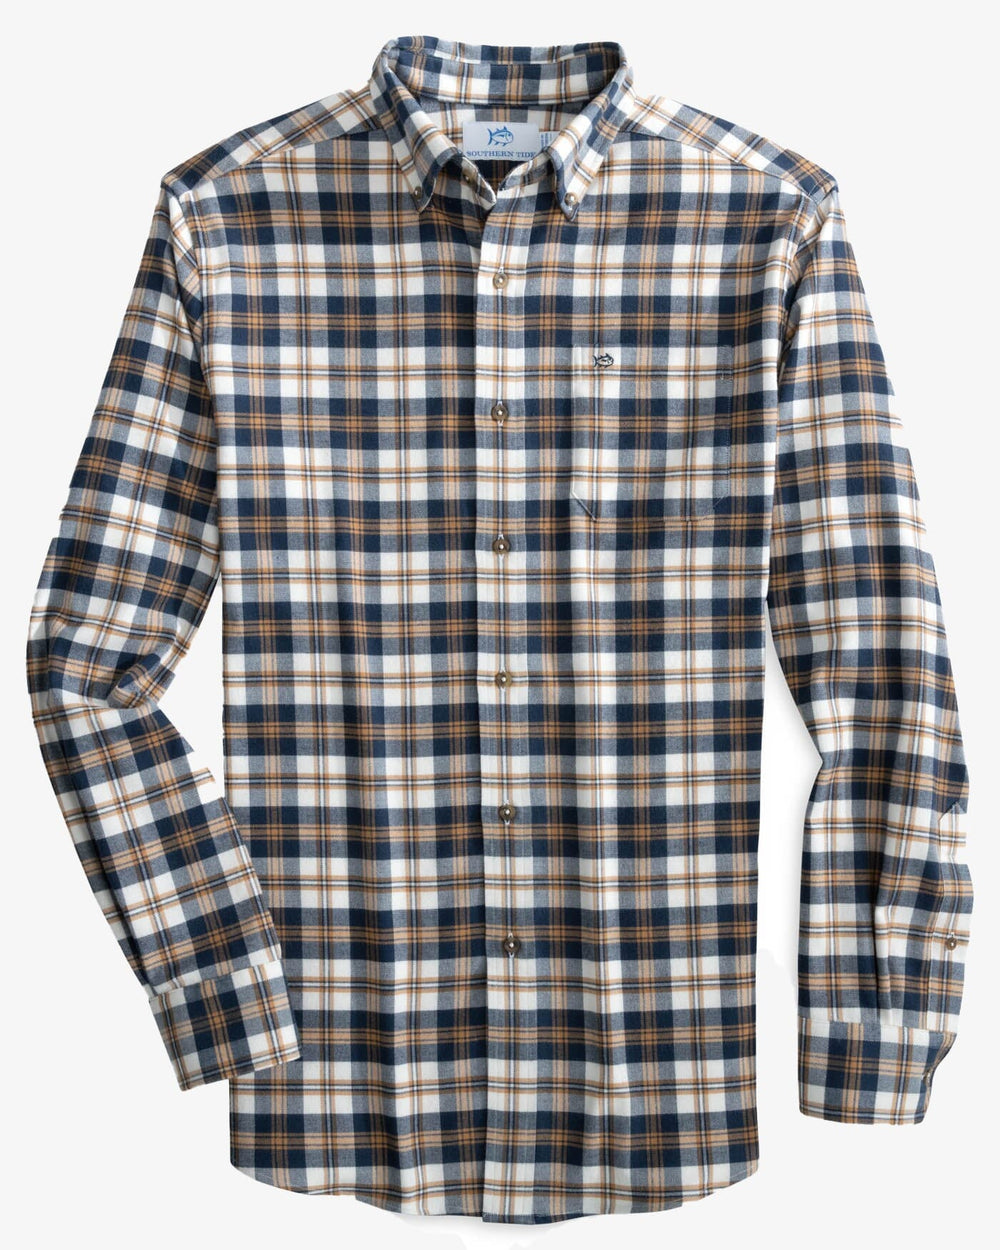 The front view of the Southern Tide Flannel Intercoastal Durant Plaid Long Sleeve Sportshirt by Southern Tide - Dress Blue